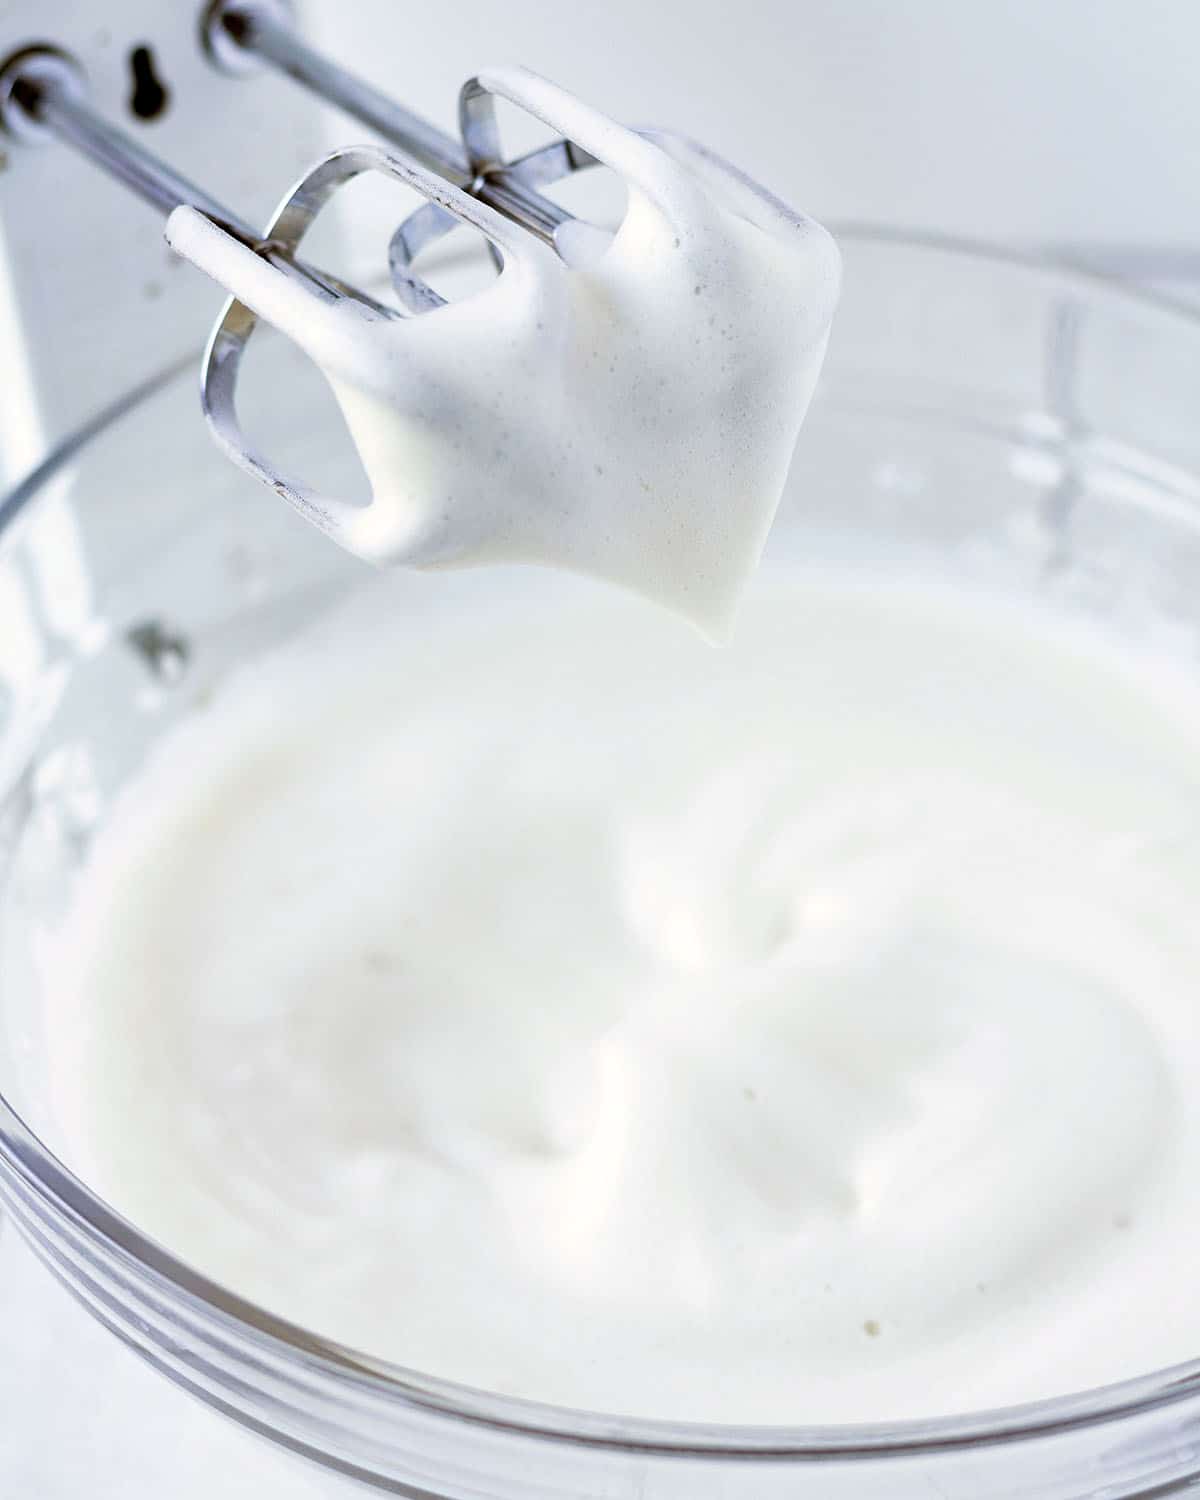 Image shows a hand mixer with a bowl of whipped aquafaba that has reached soft peak stage.